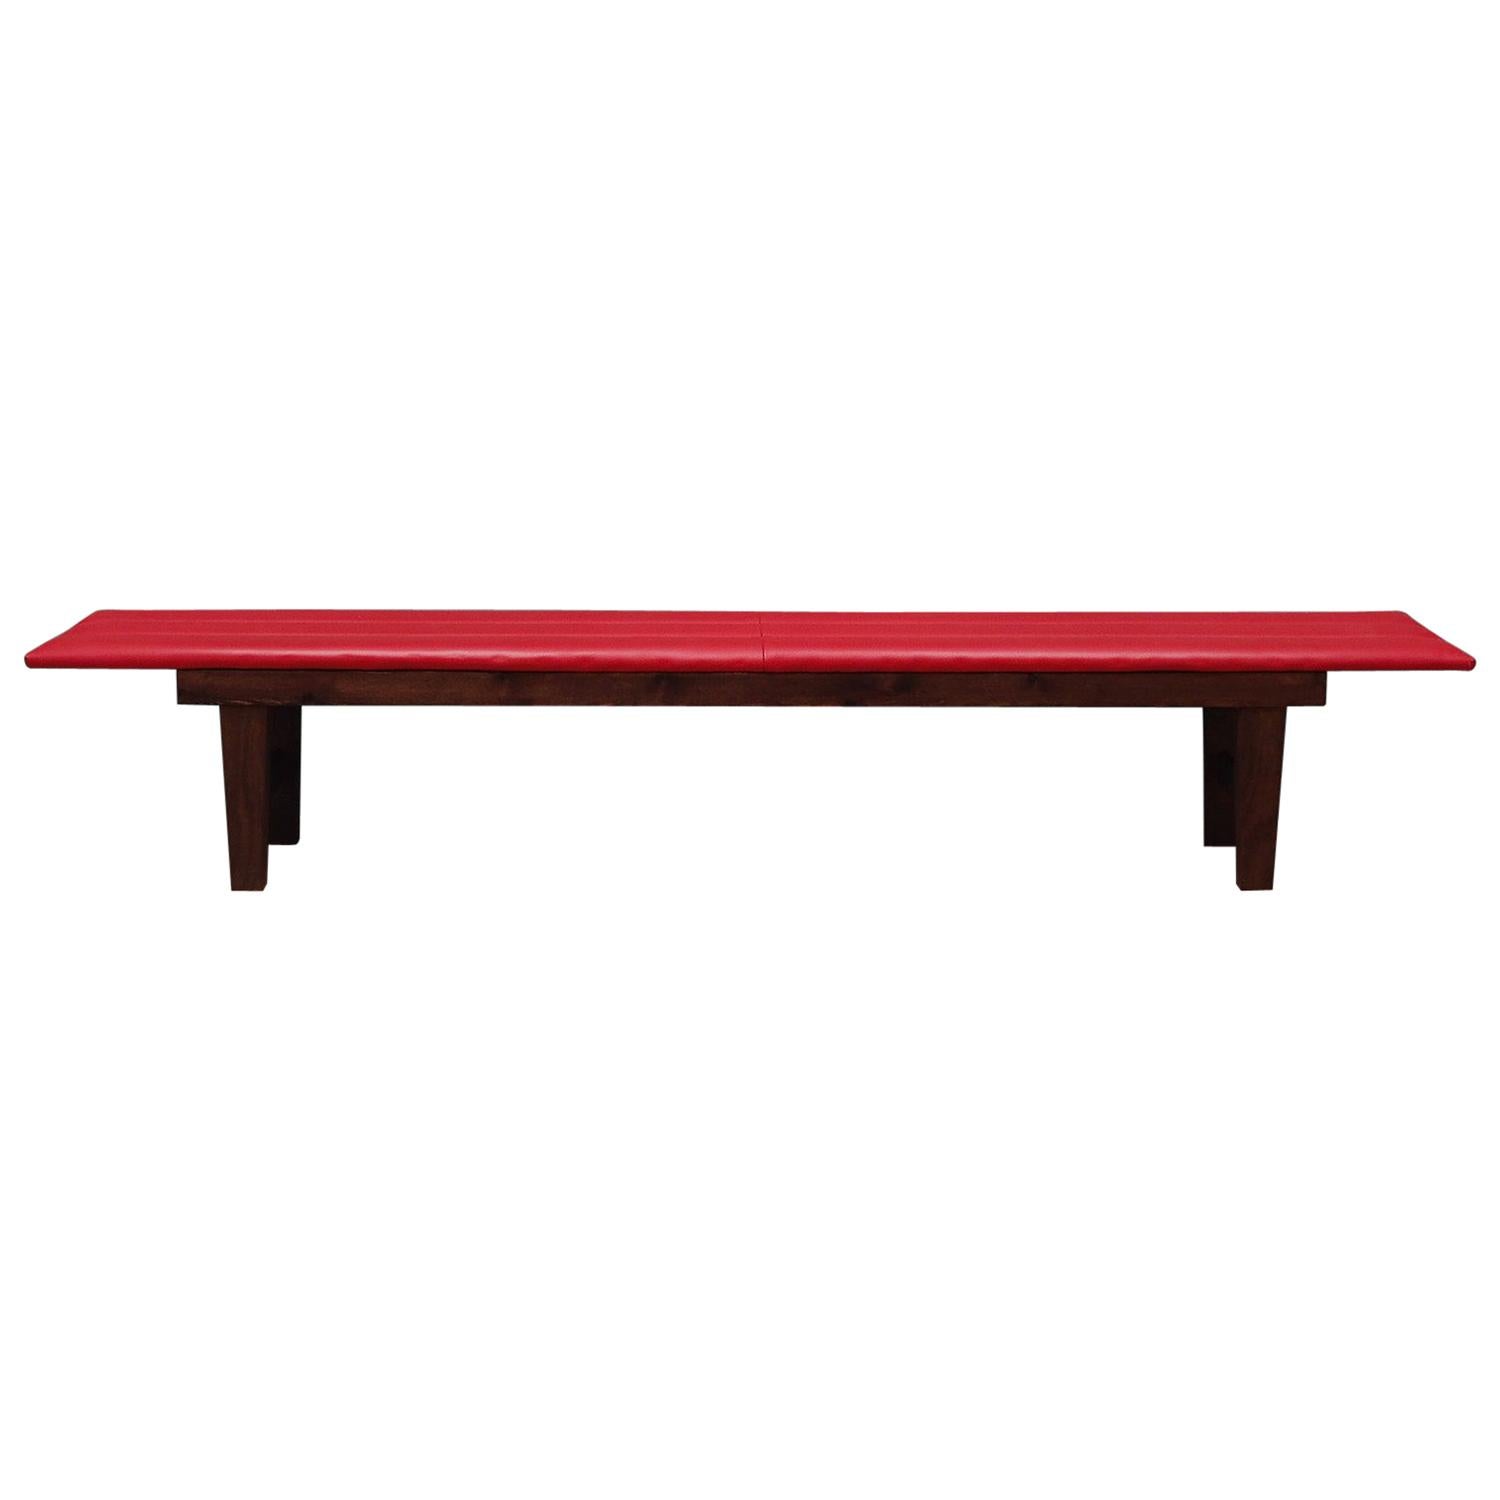 Bench Red Eco-Leather, Danish Design, 1990s For Sale